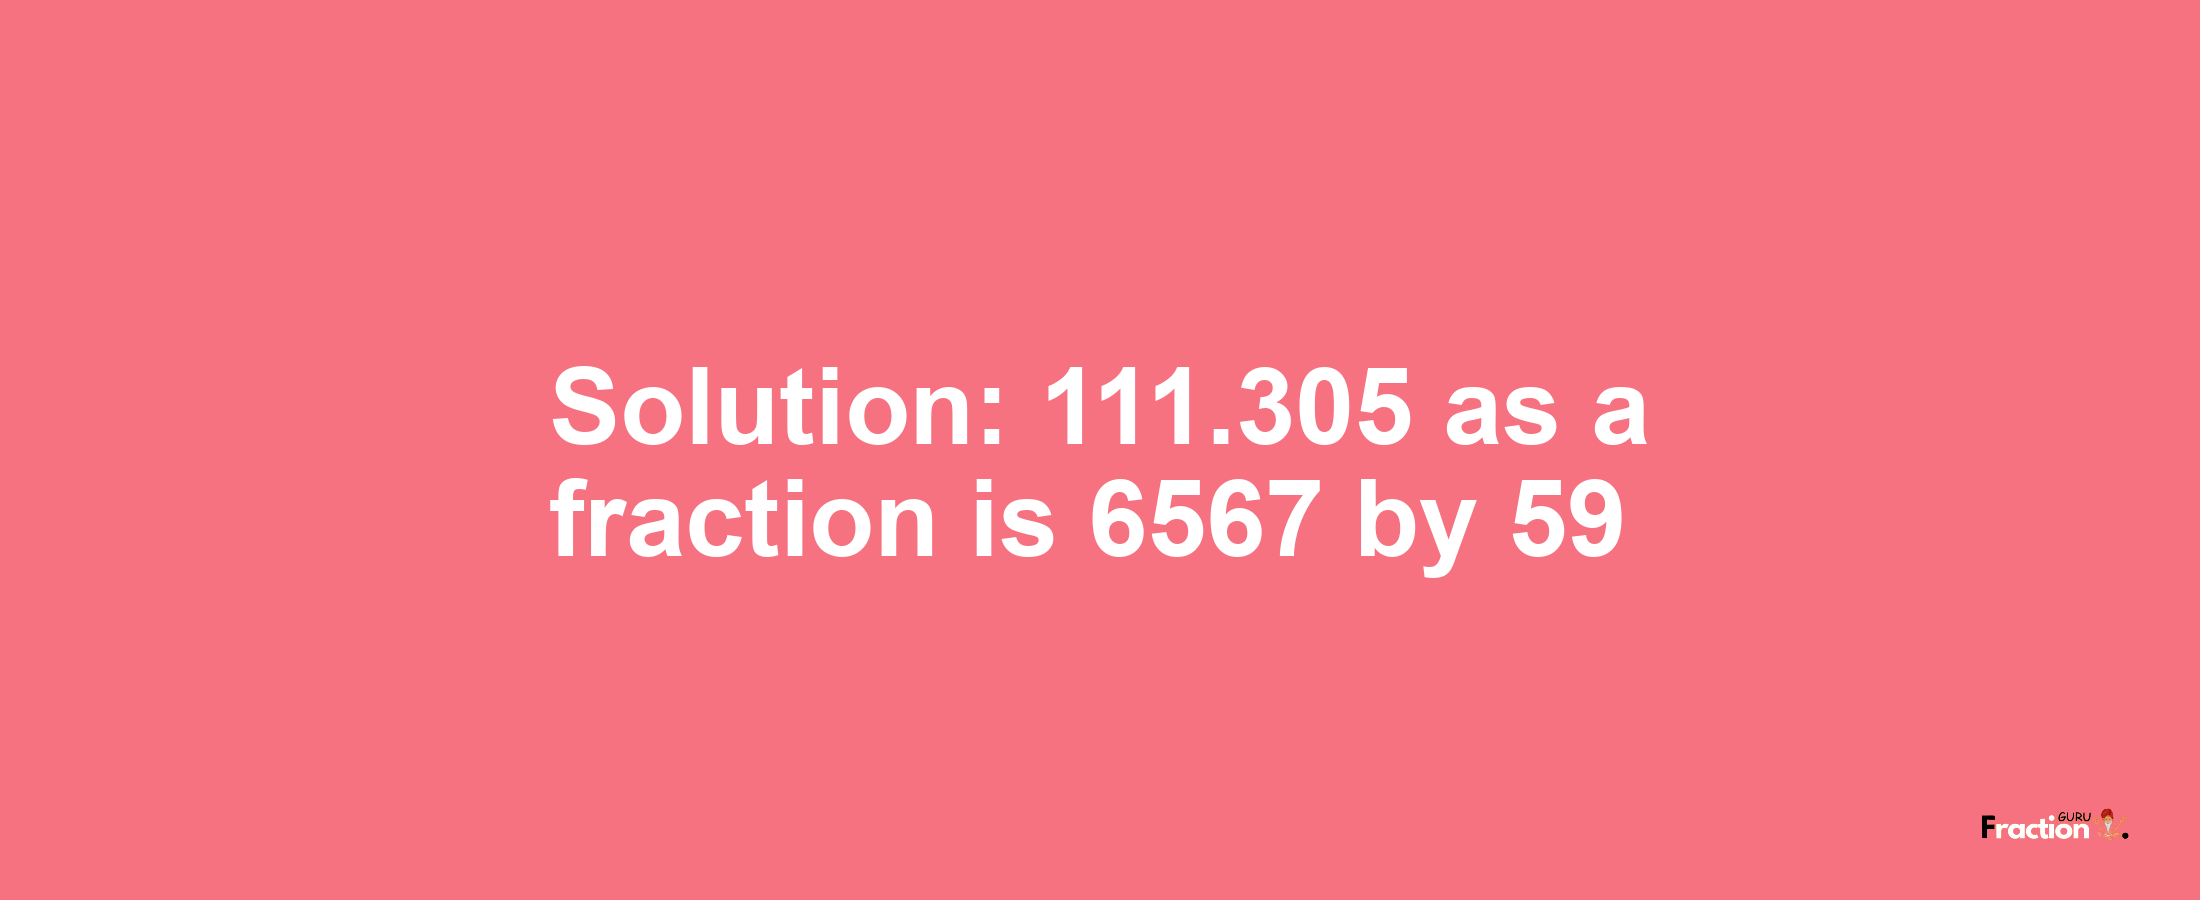 Solution:111.305 as a fraction is 6567/59